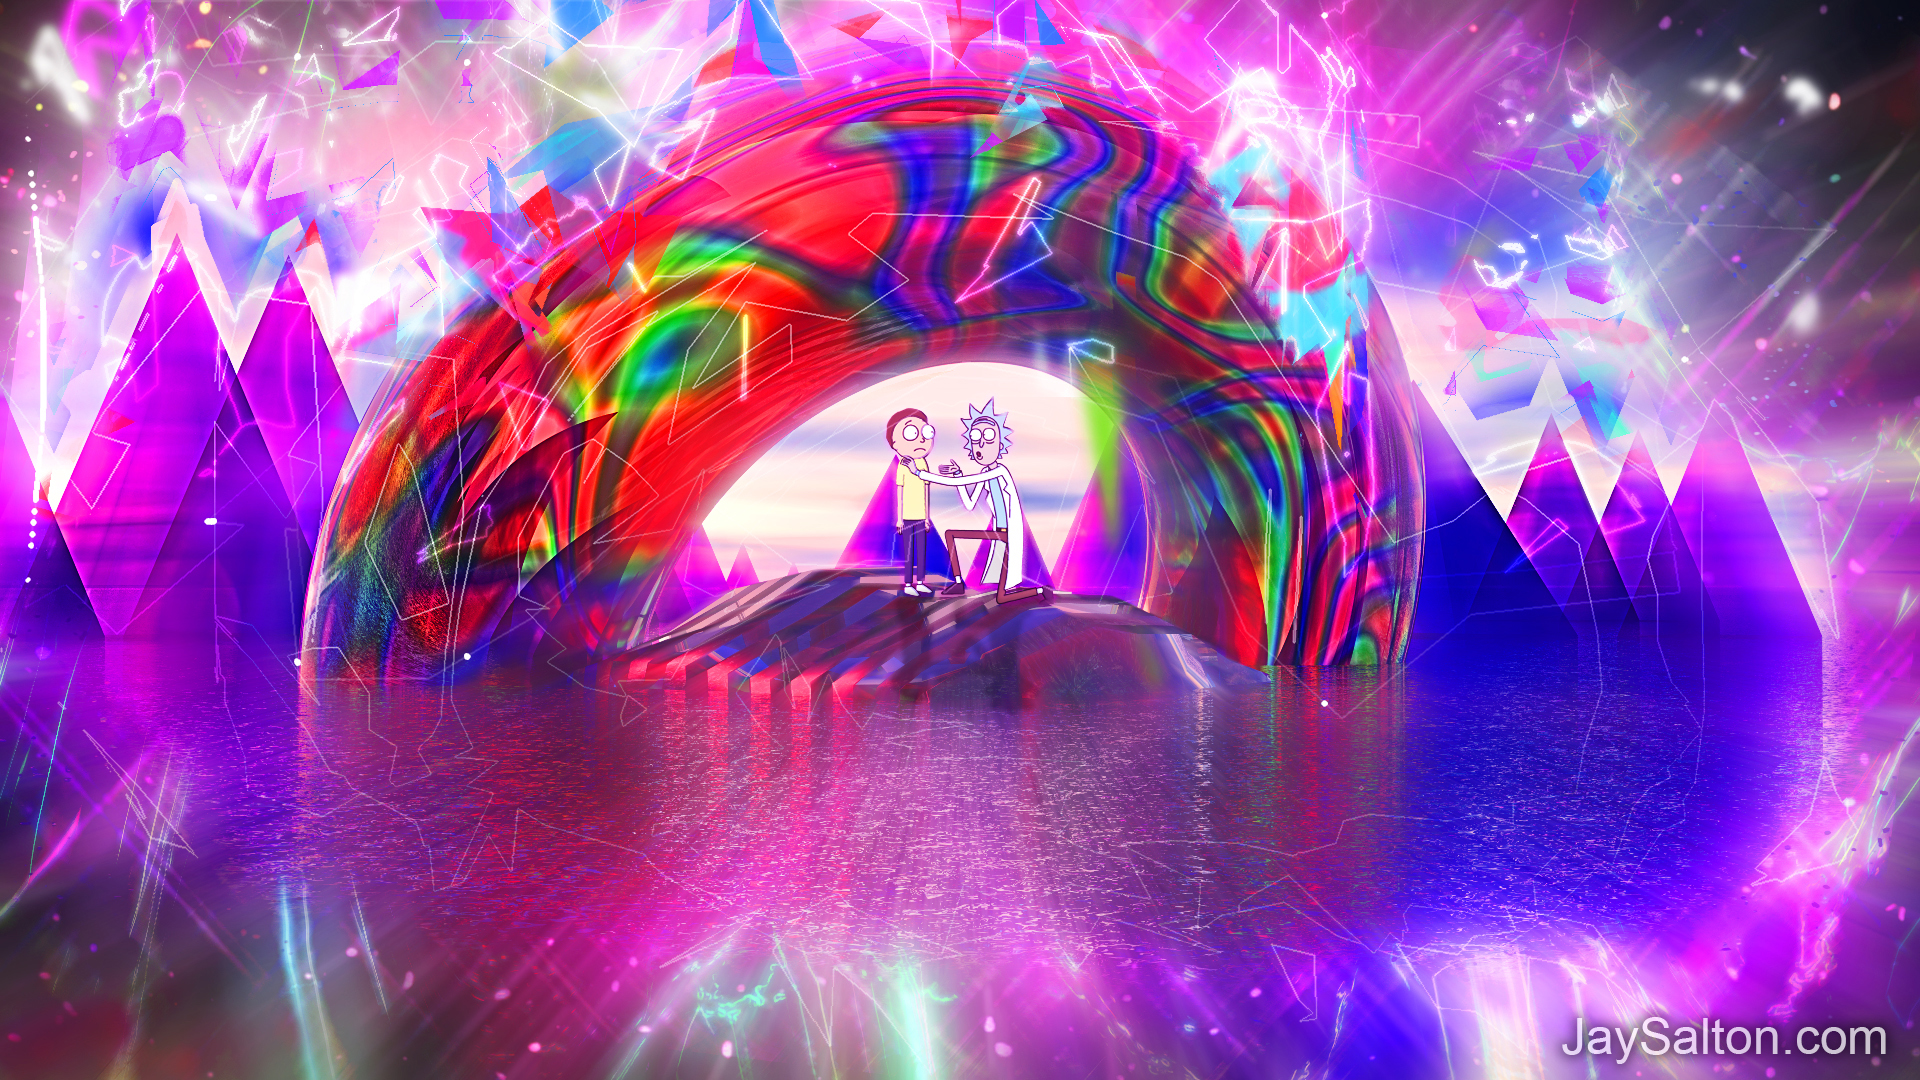 Rick and Morty, Adult Swim, psychedelic